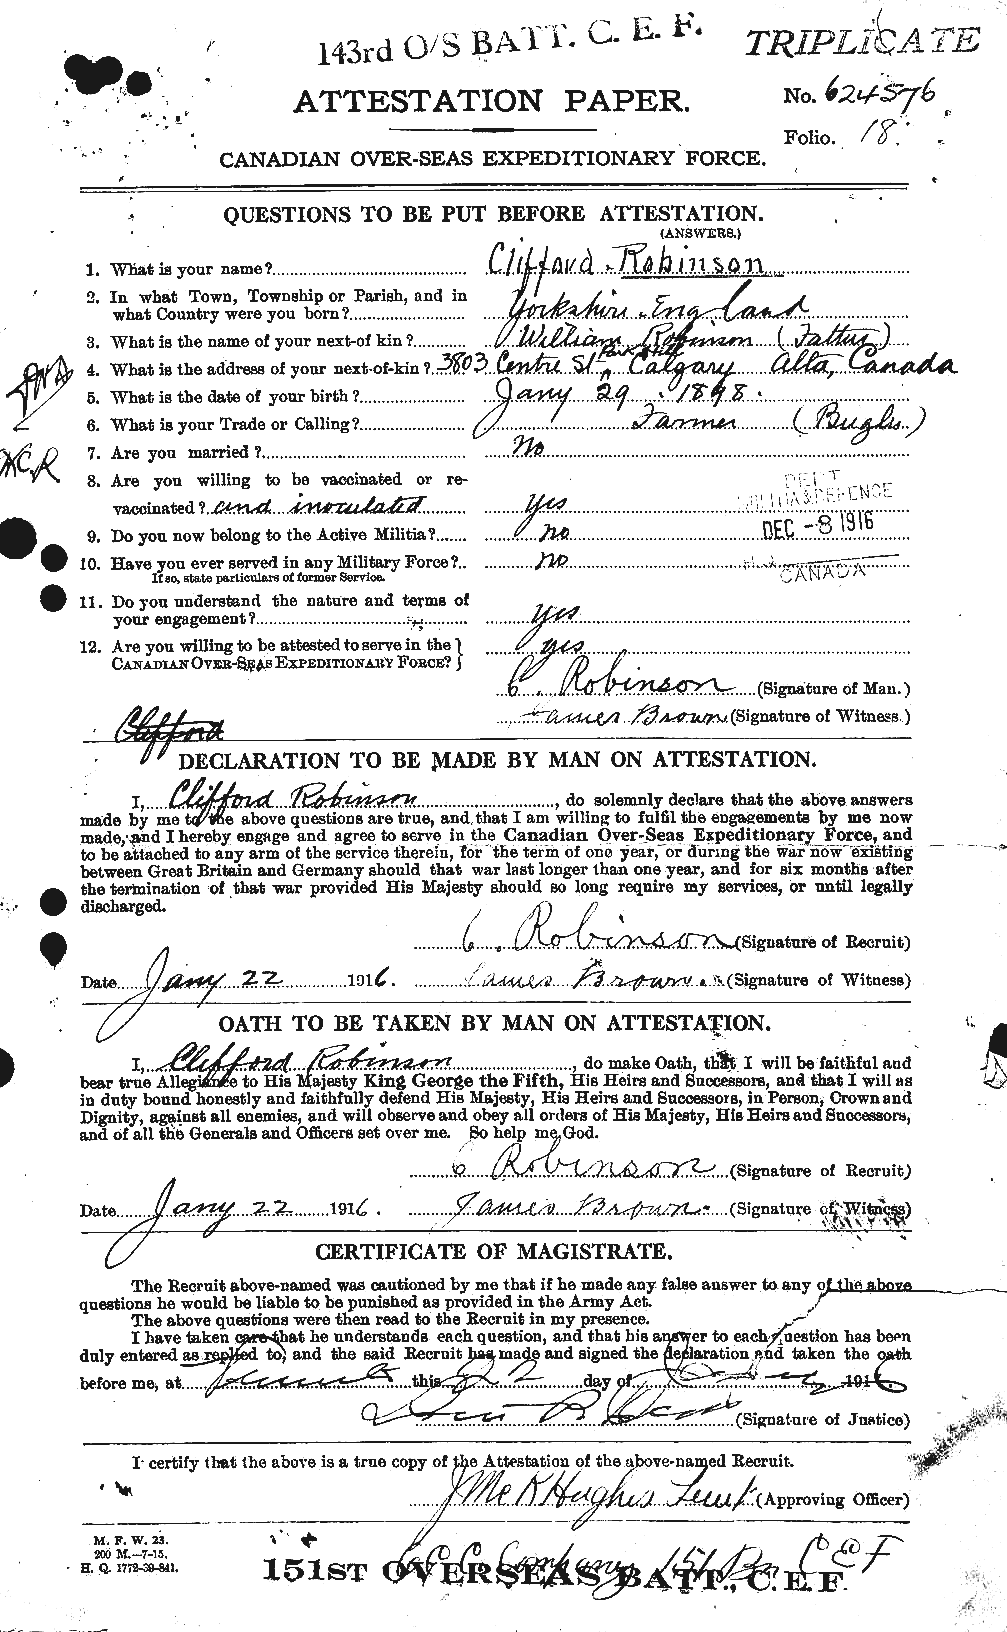 Personnel Records of the First World War - CEF 607114a